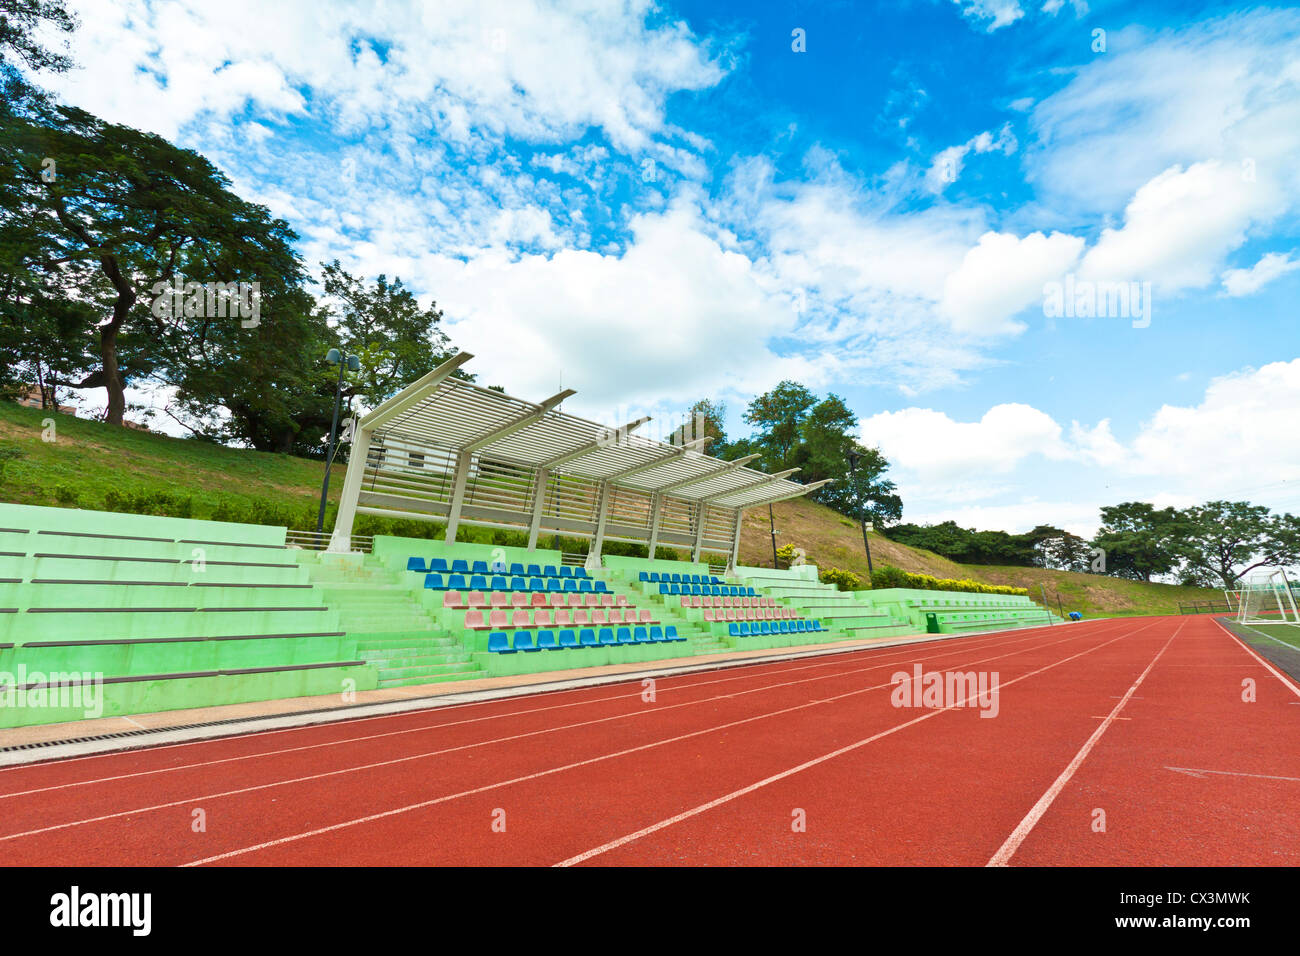 Stadium chairs and running track in a sports ground Stock Photo